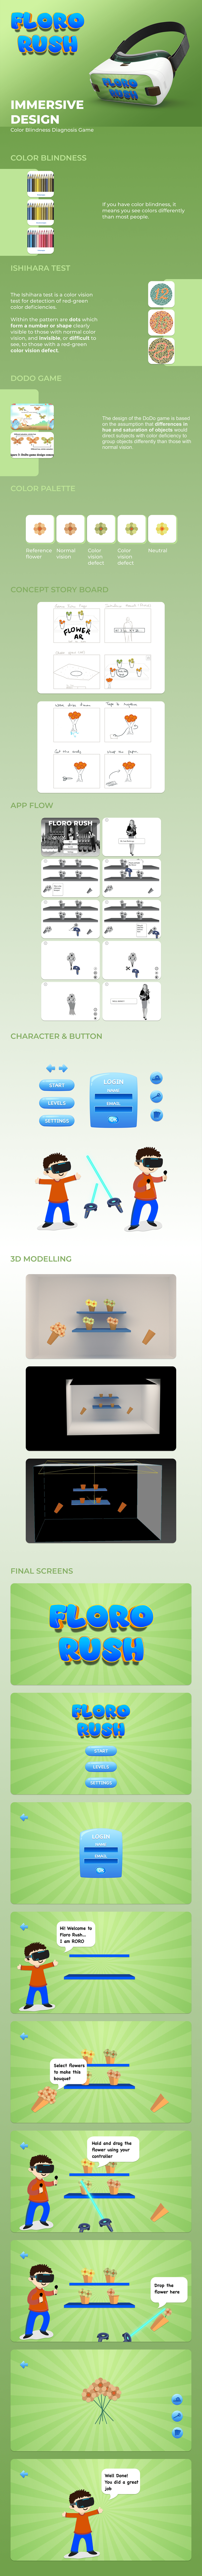 uiux Virtual reality augmented reality app design Colorblindness 3D immersive vr